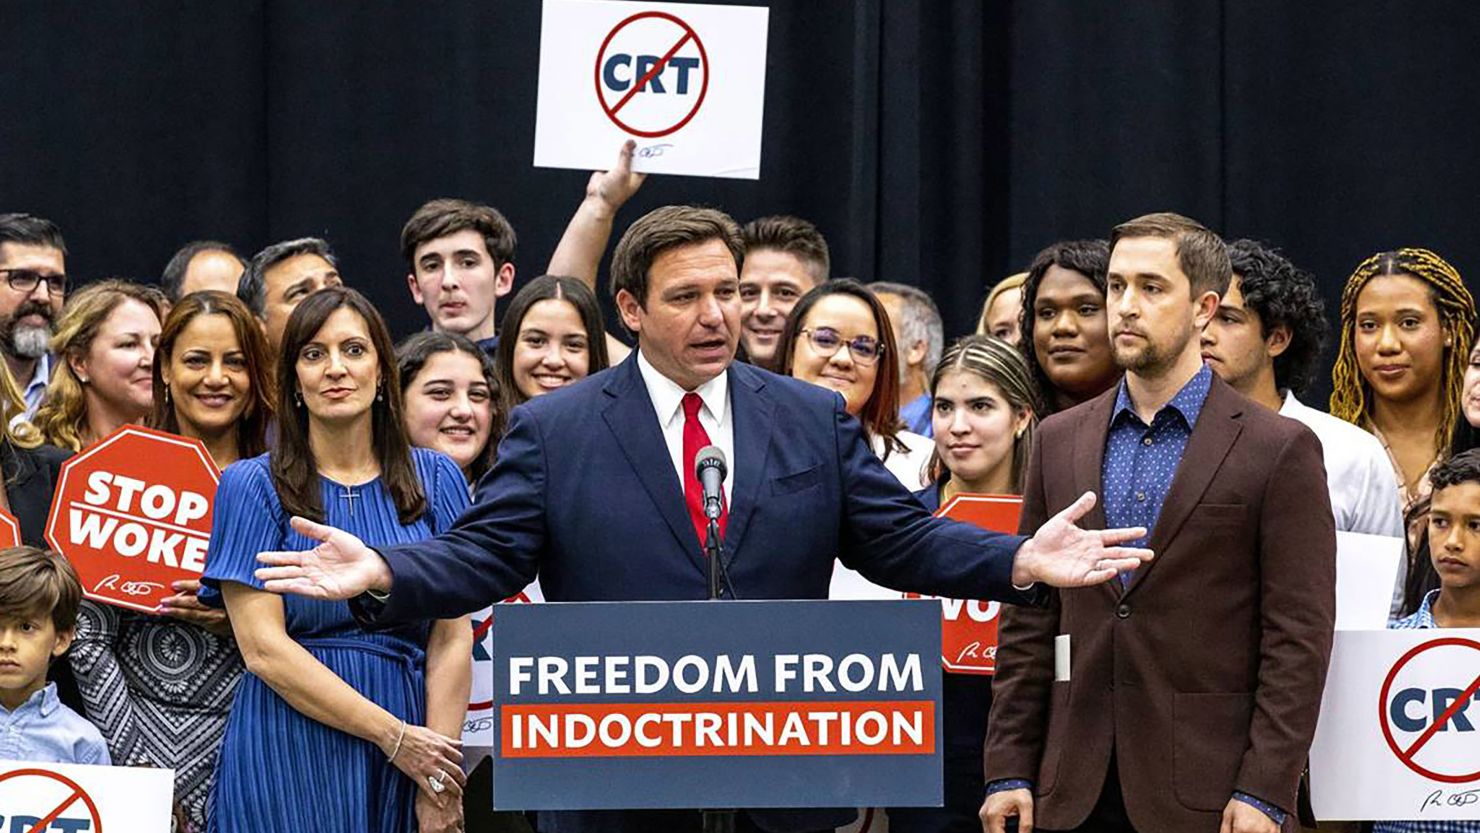 Florida Gov. Ron DeSantis signed HB 7, known as the "Stop WOKE Act," in Hialeah Gardens, Florida, in April 2022.